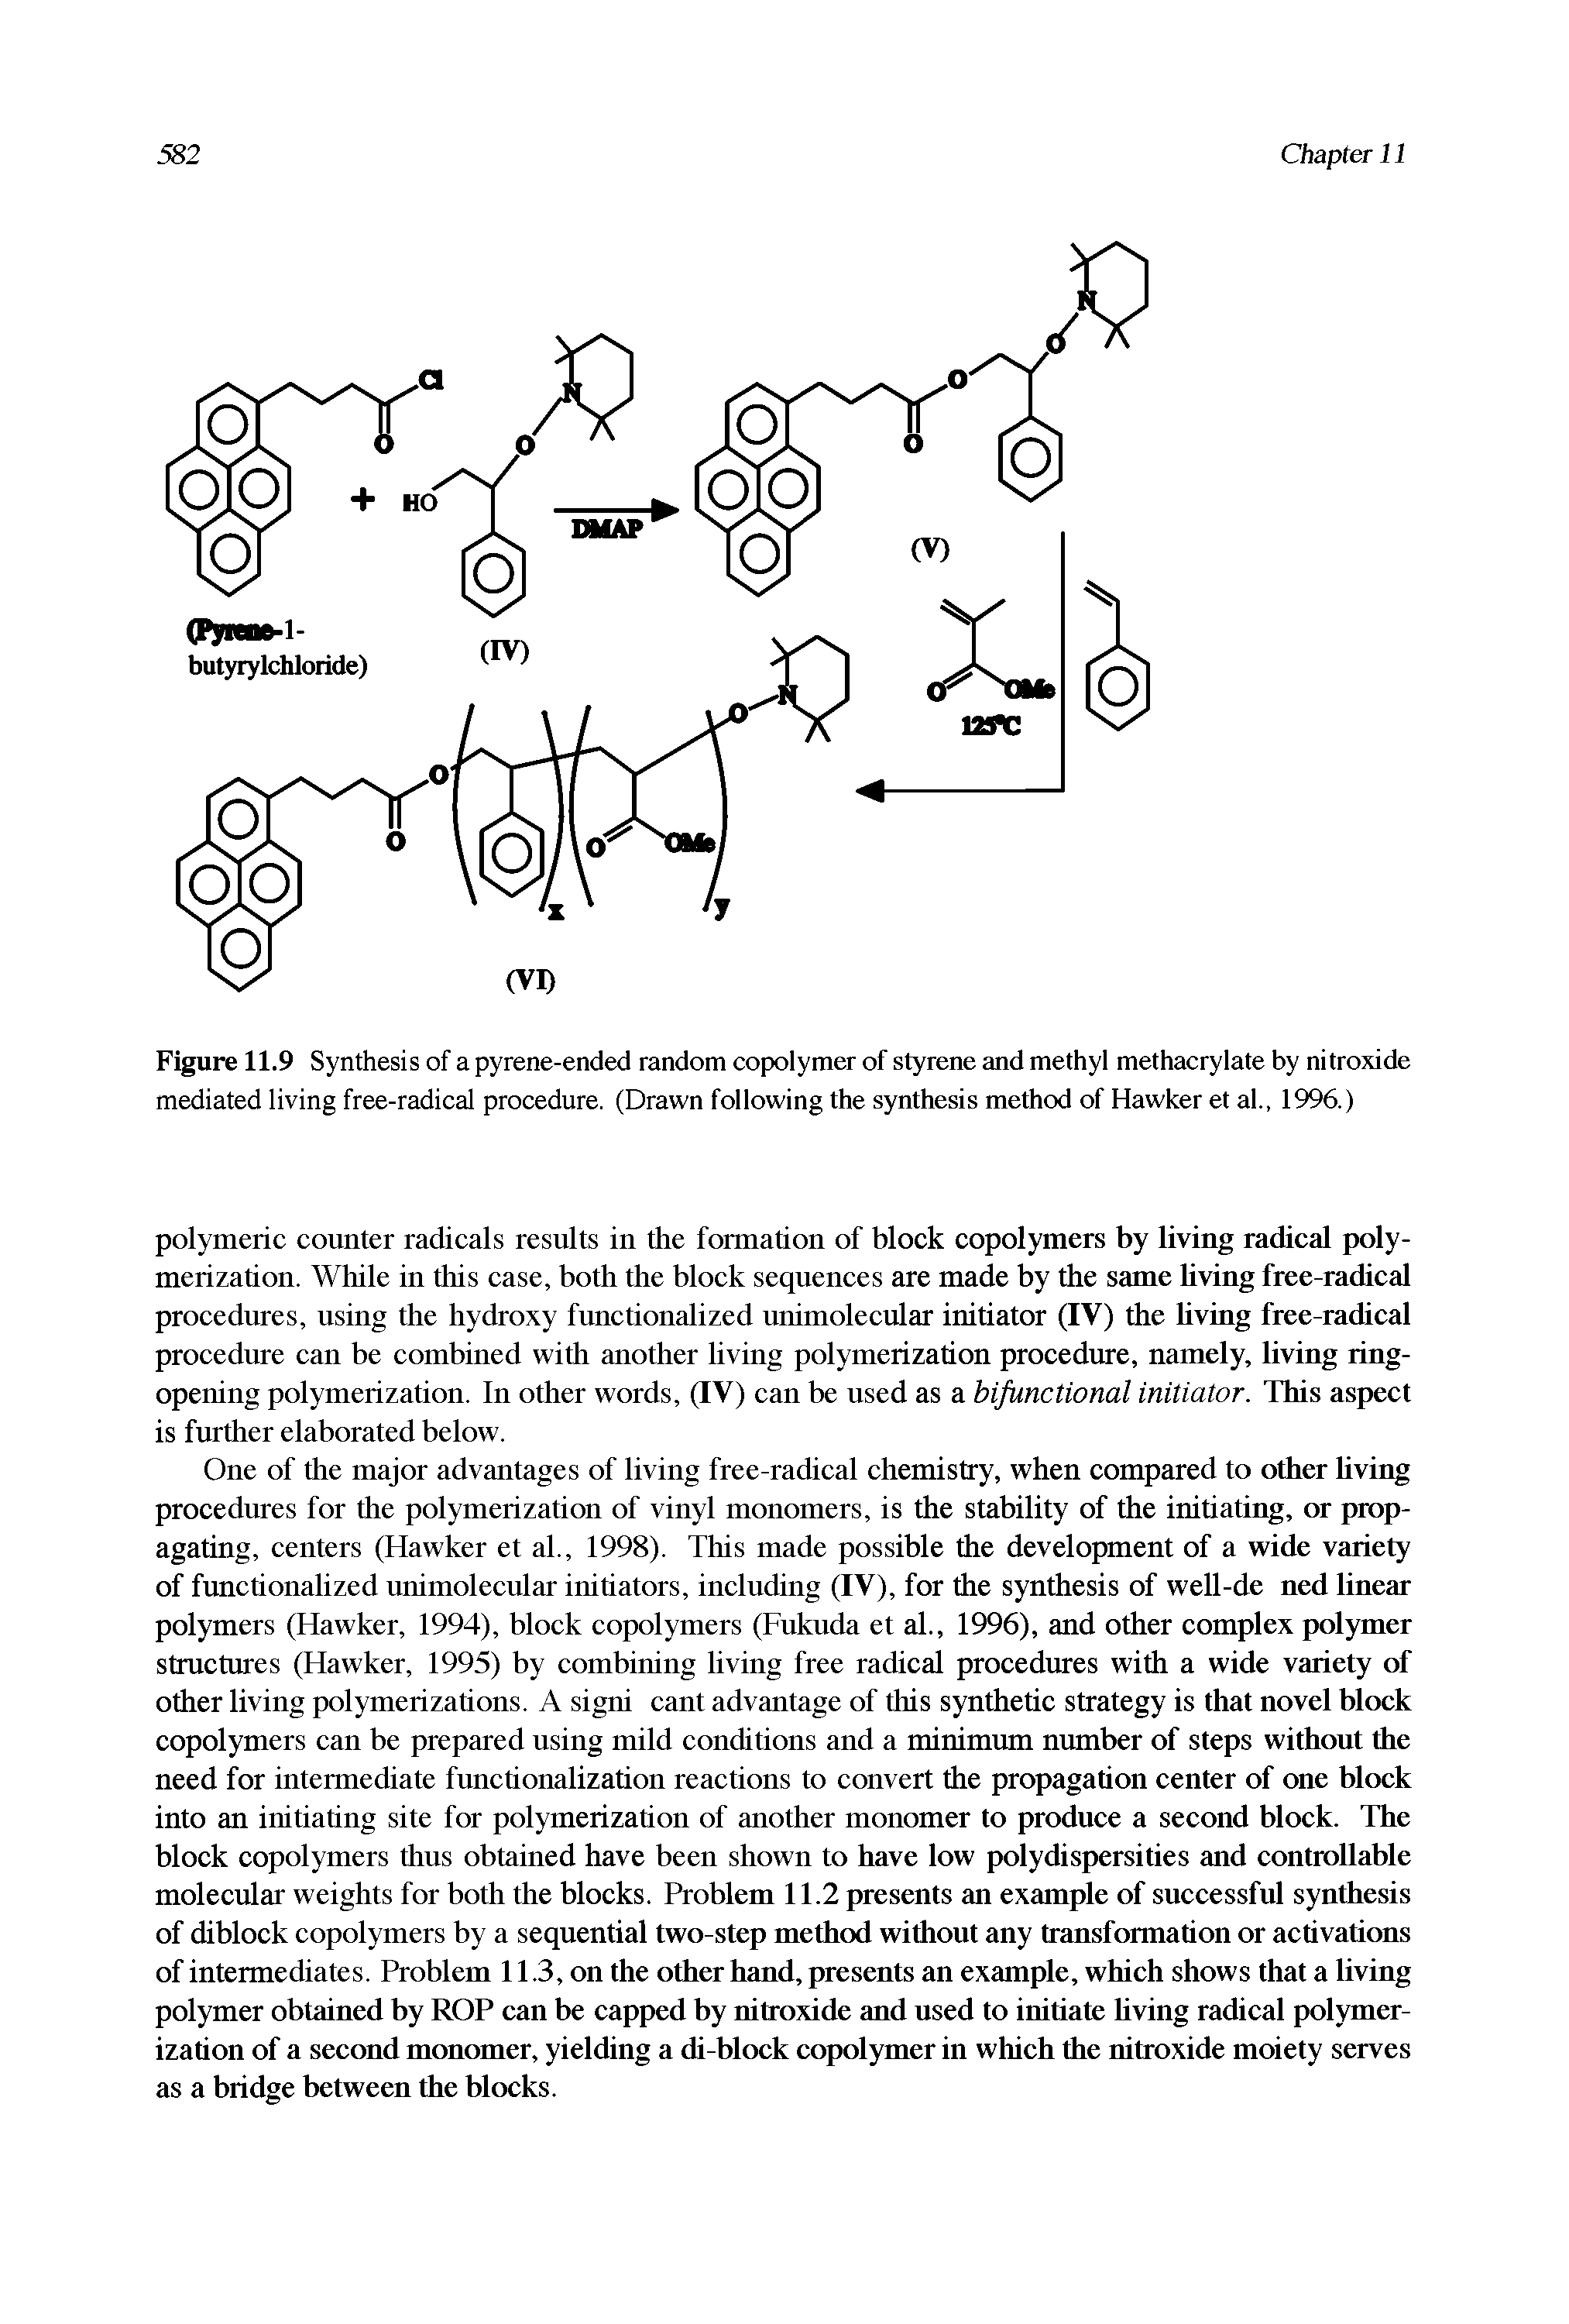 Figure 11.9 Synthesis of a pyrene-ended random copolymer of styrene and methyl methacrylate by nitroxide mediated living free-radical procedure. (Drawn following the synthesis method of Hawker et al., 1996.)...